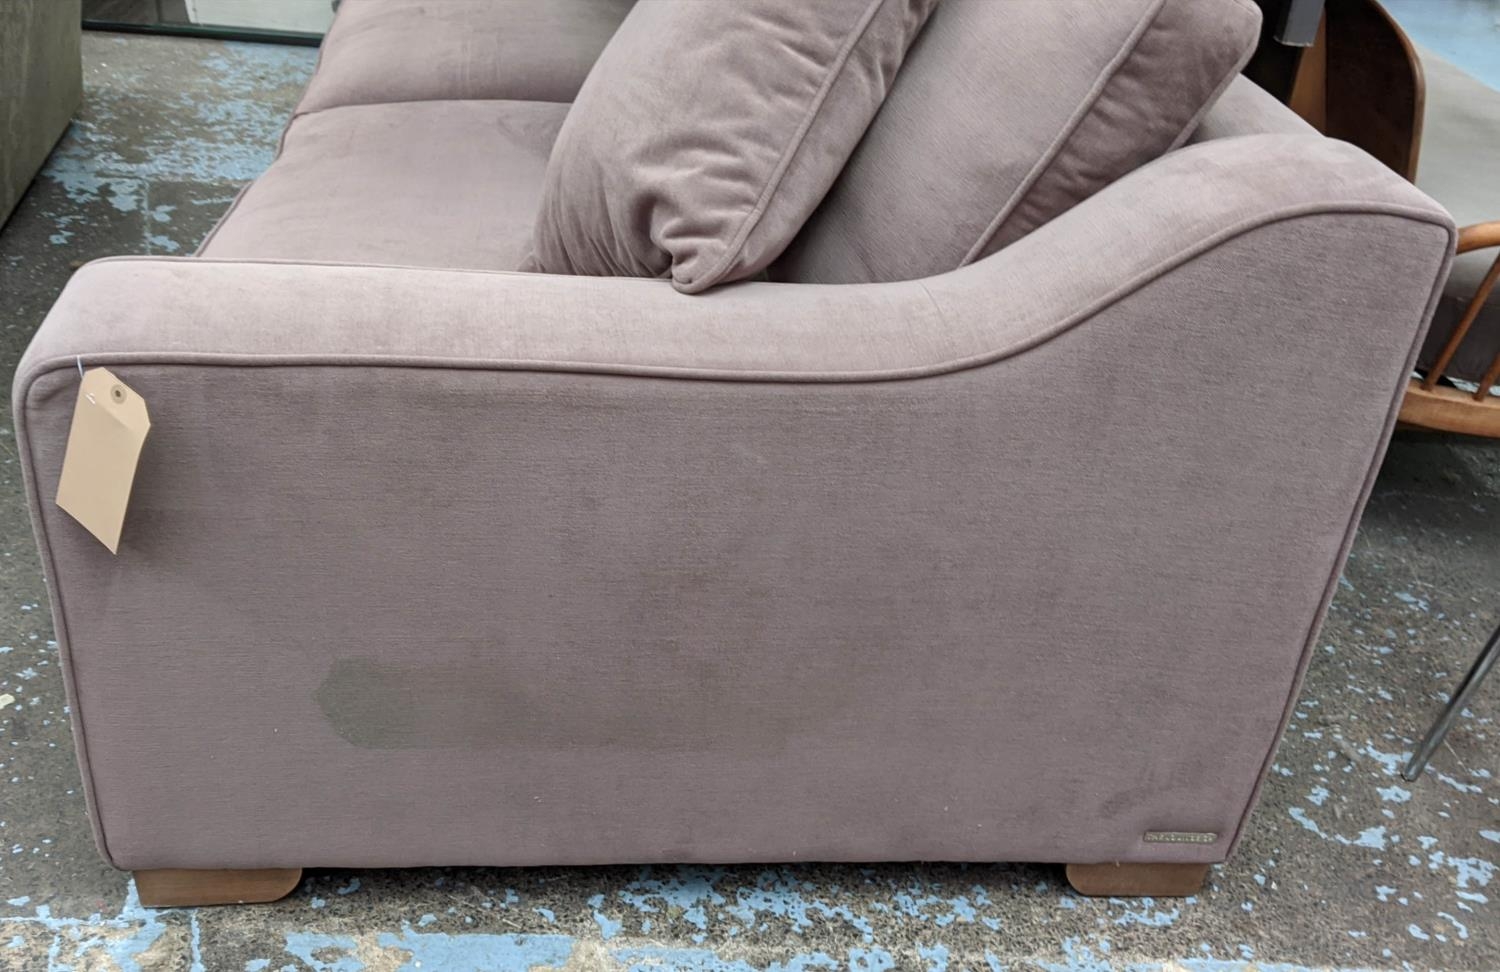 THE LOUNGE CO IMOGEN SOFA, 250cm H, four-seater. - Image 2 of 5